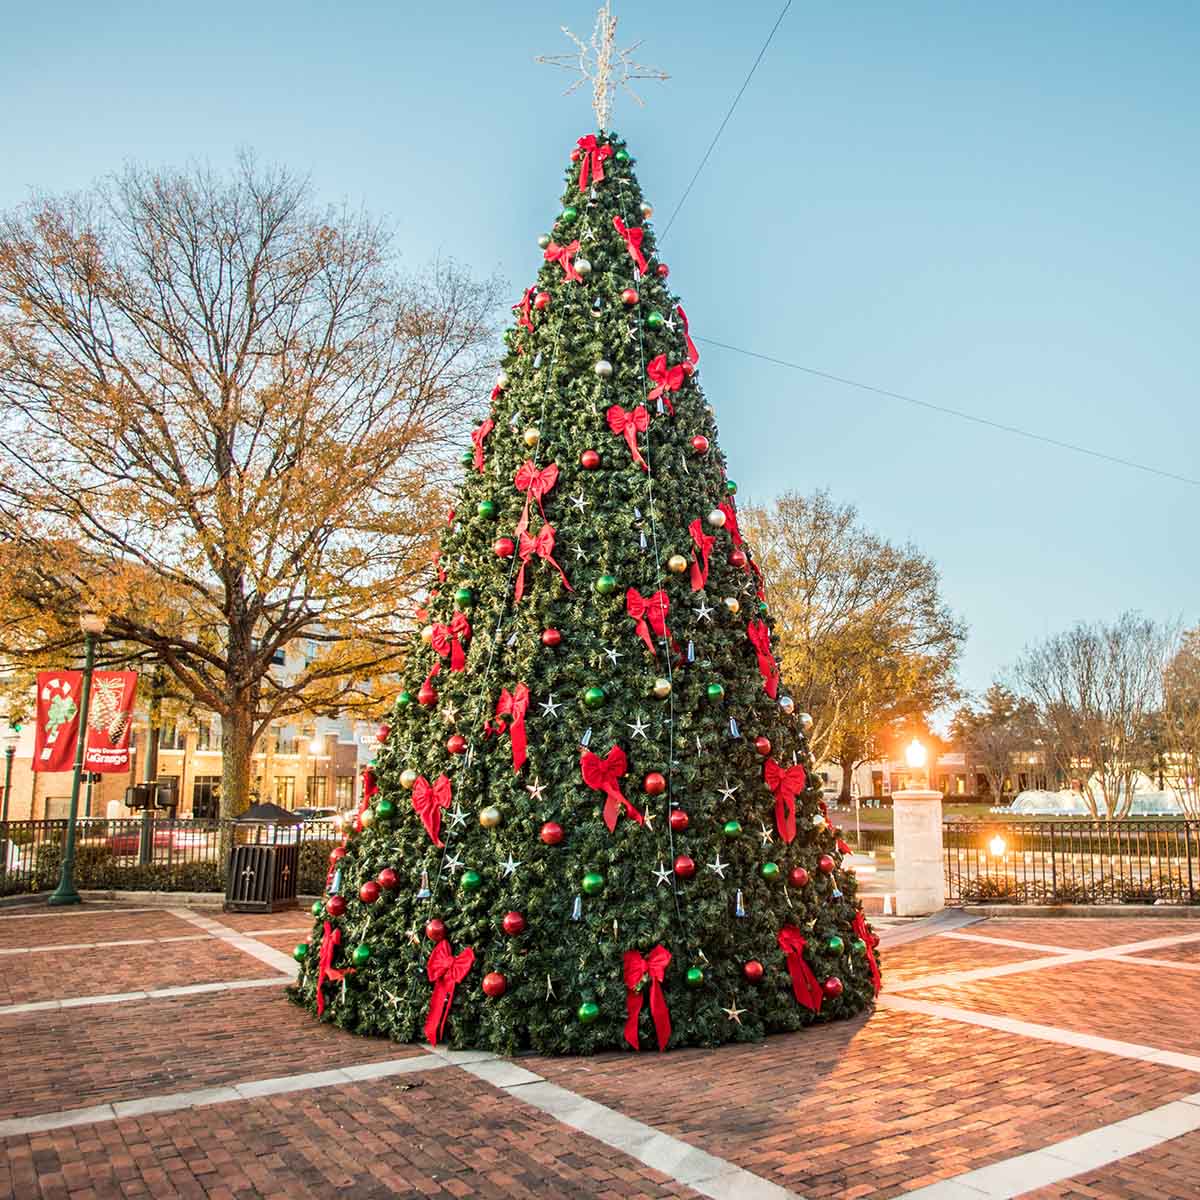 Large decorated Christmas tree in downtown LaGrange, Georgia.